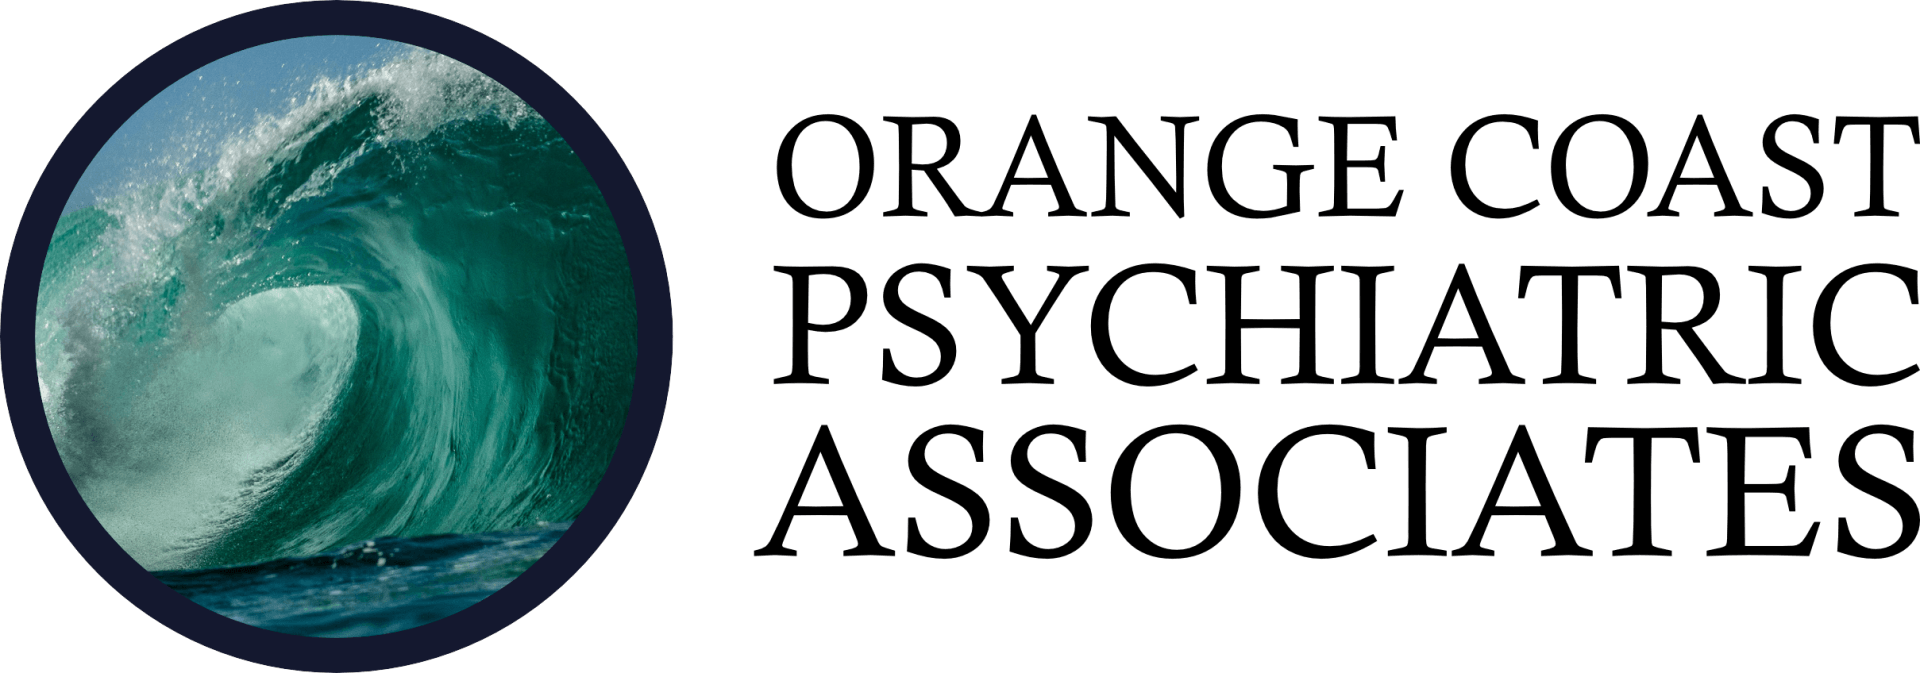 the logo for orange coast psychiatric associates shows a wave in the ocean .